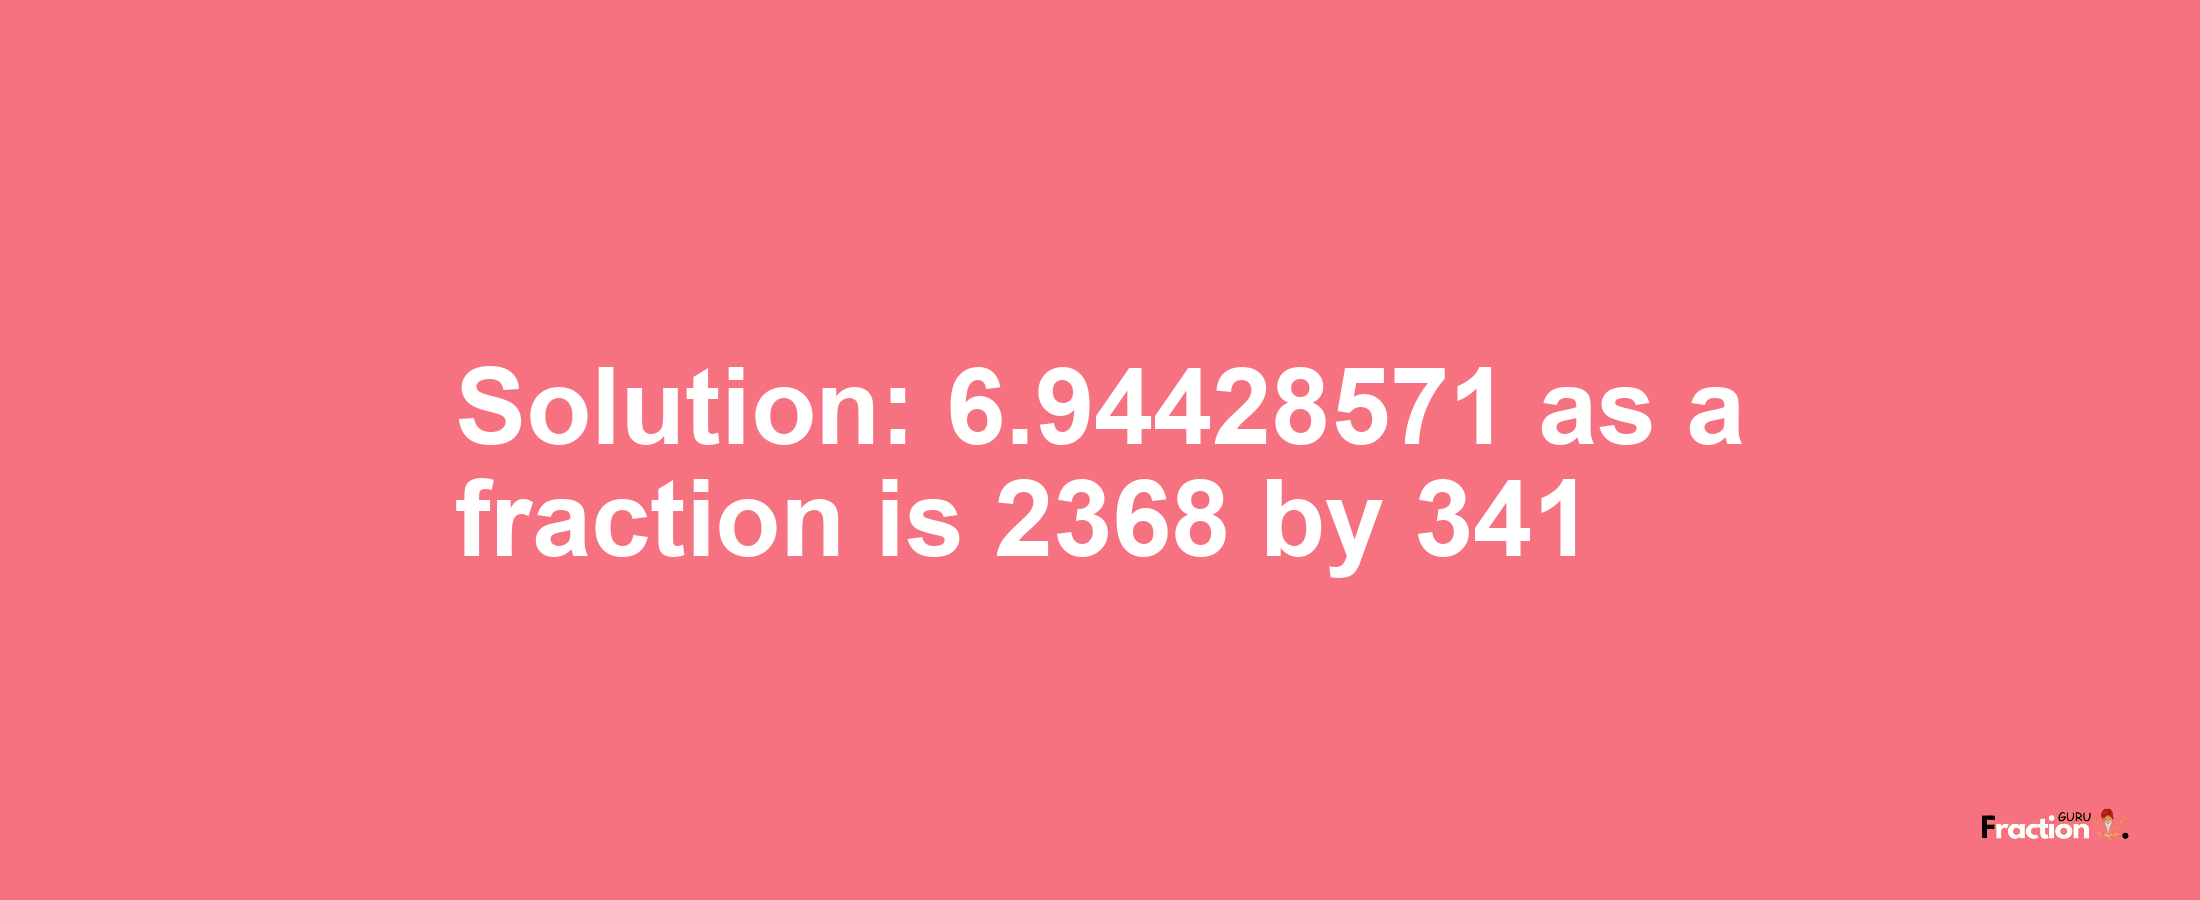 Solution:6.94428571 as a fraction is 2368/341